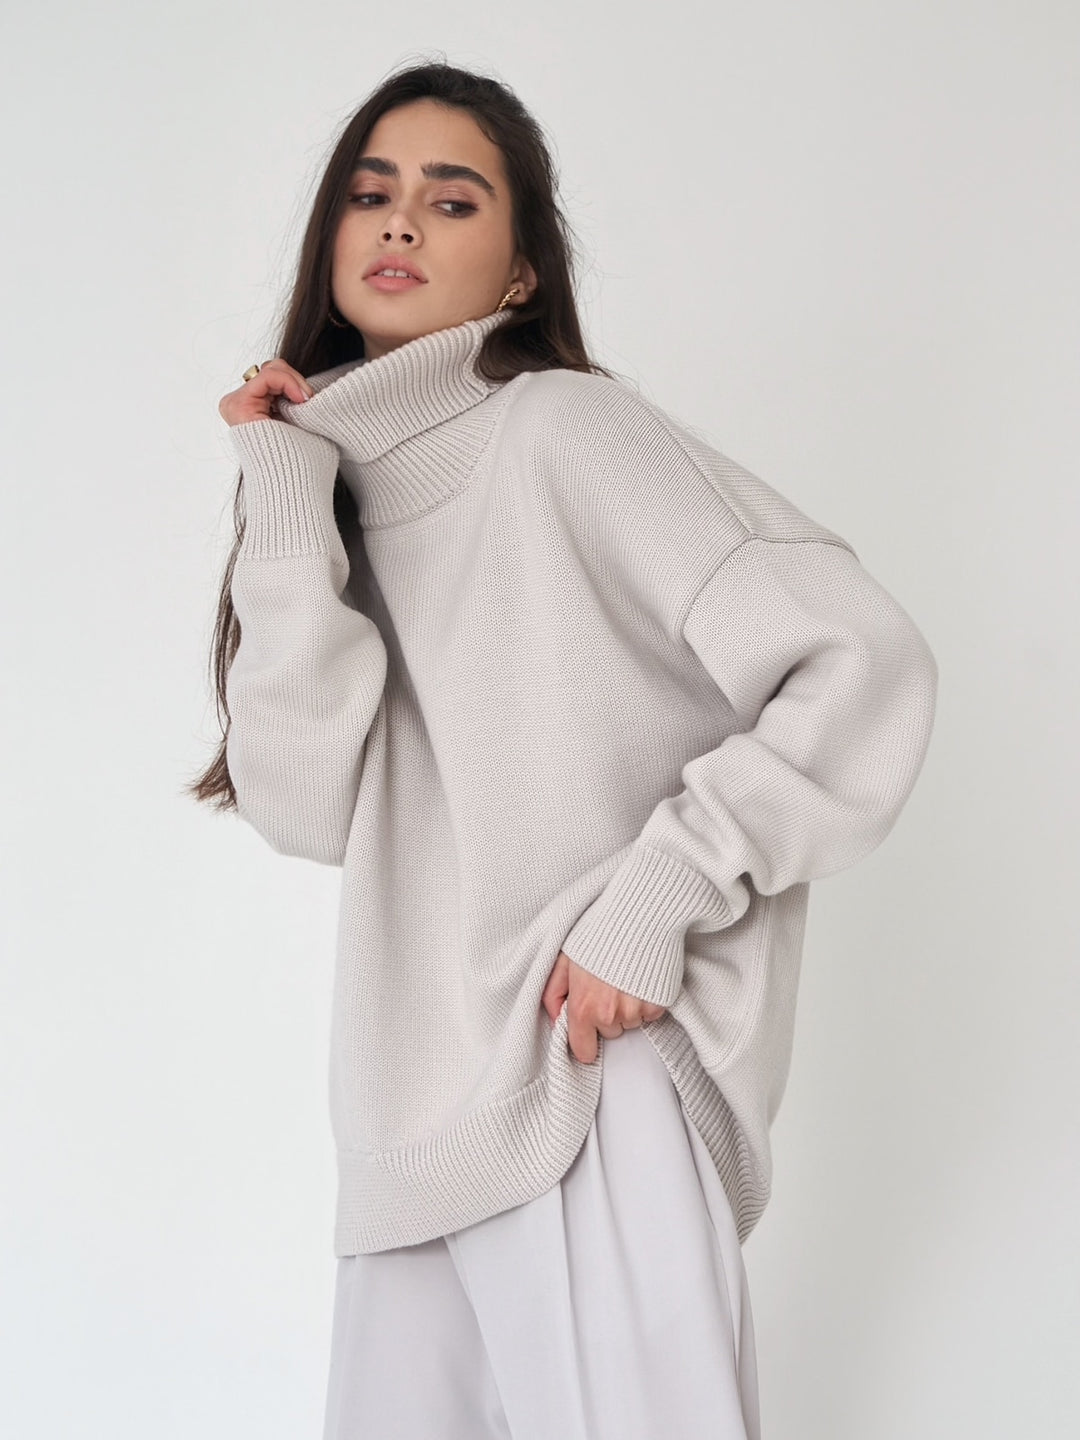 Oversized Women's Turtleneck Sweater| All For Me Today